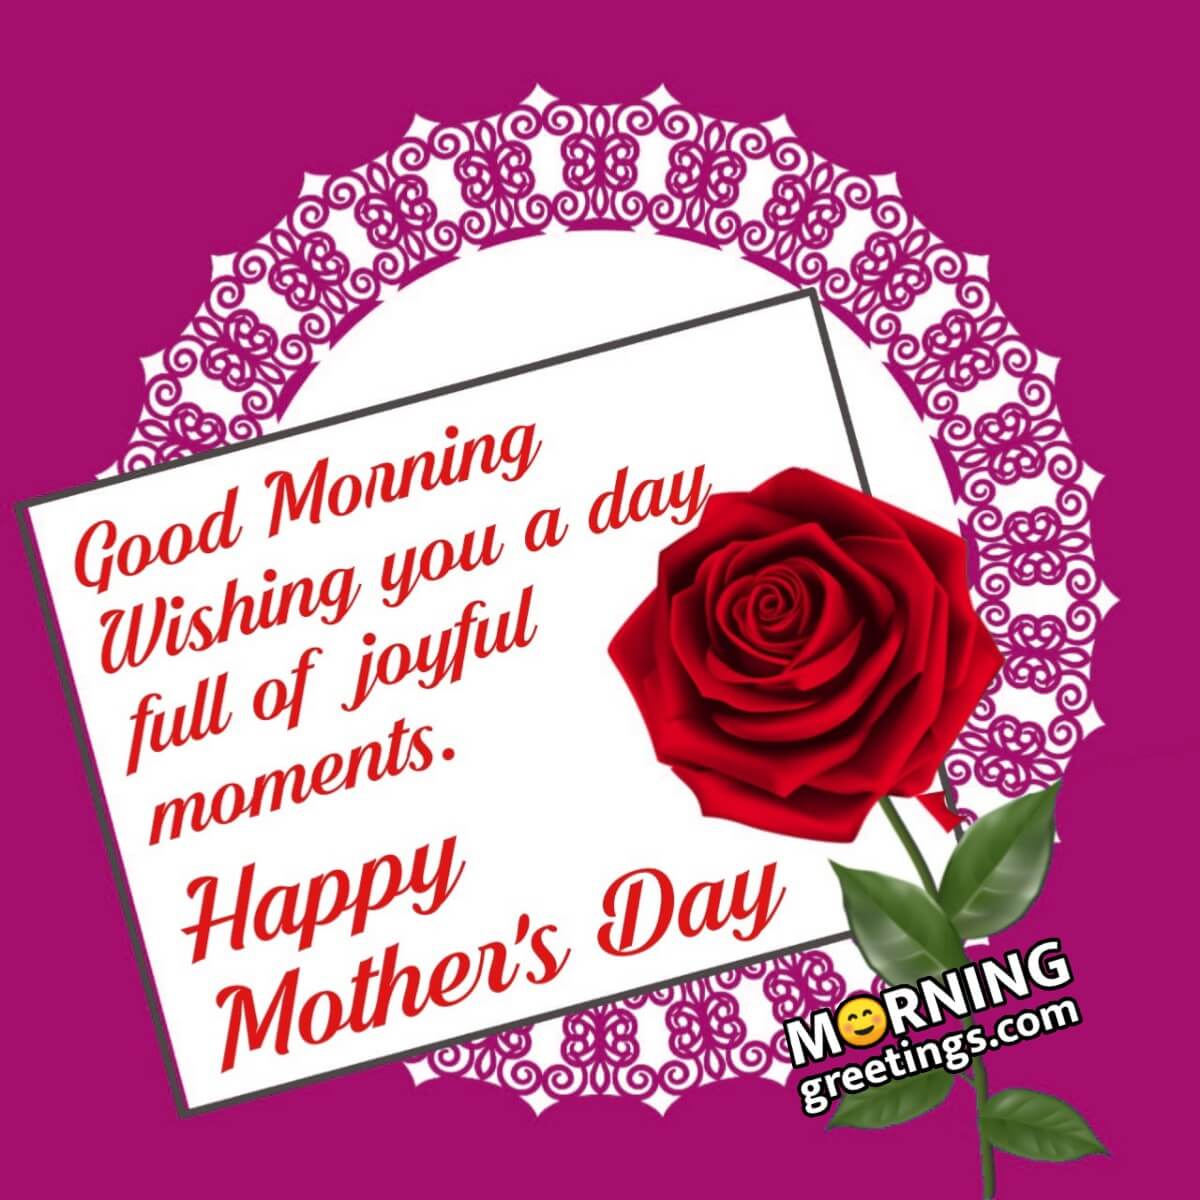 Good Morning Wishing Happy Mother’s Day